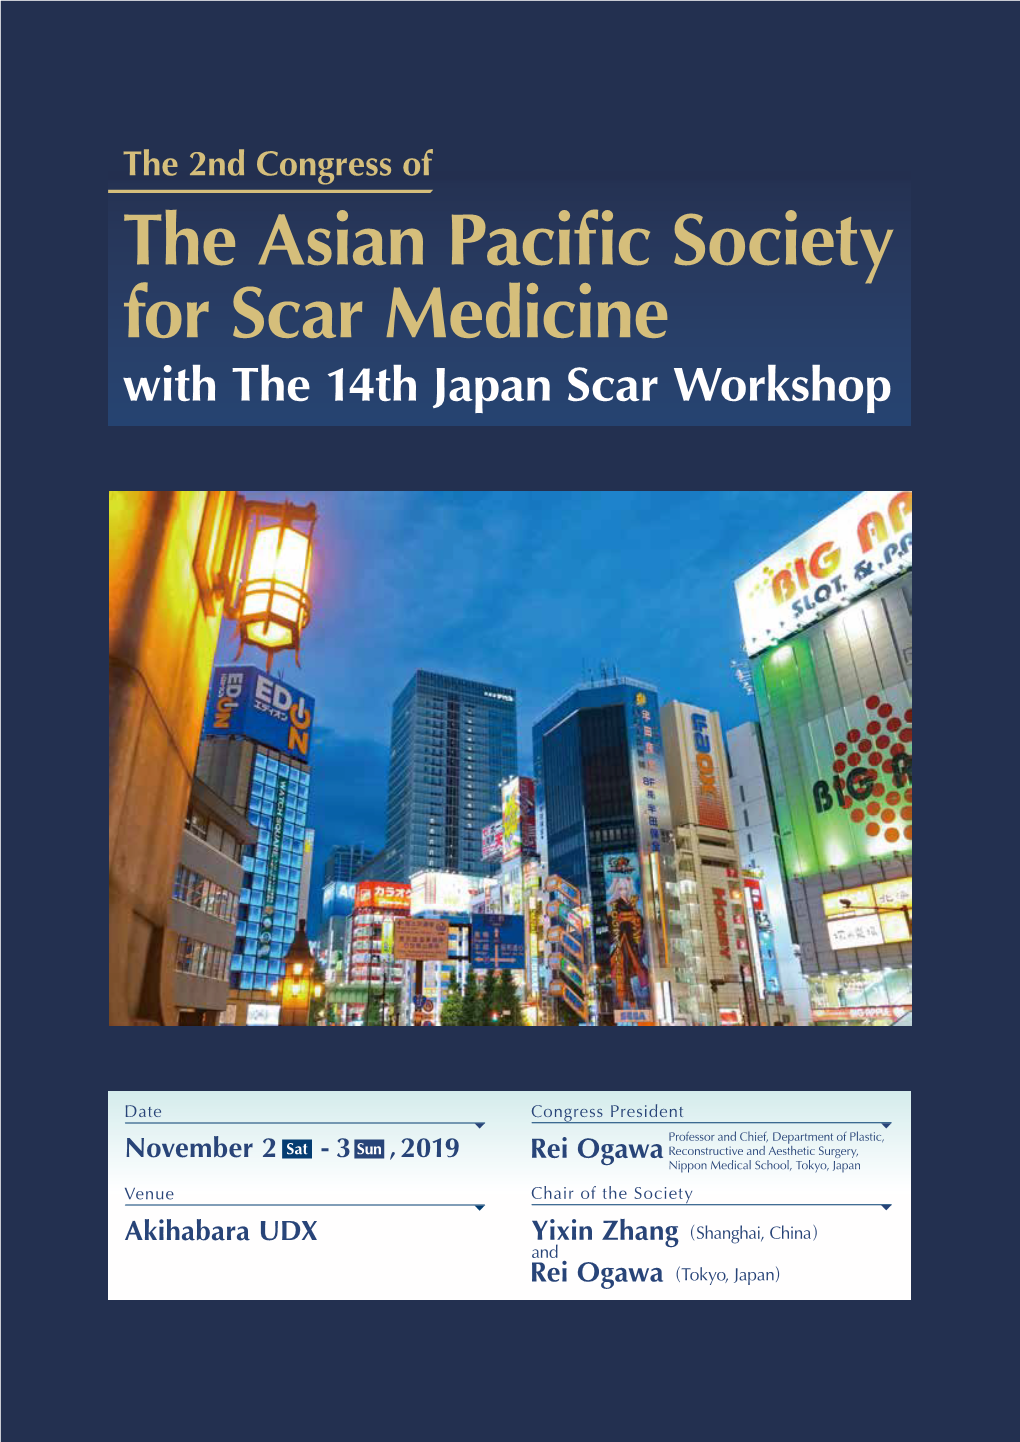 The Asian Pacific Society for Scar Medicine